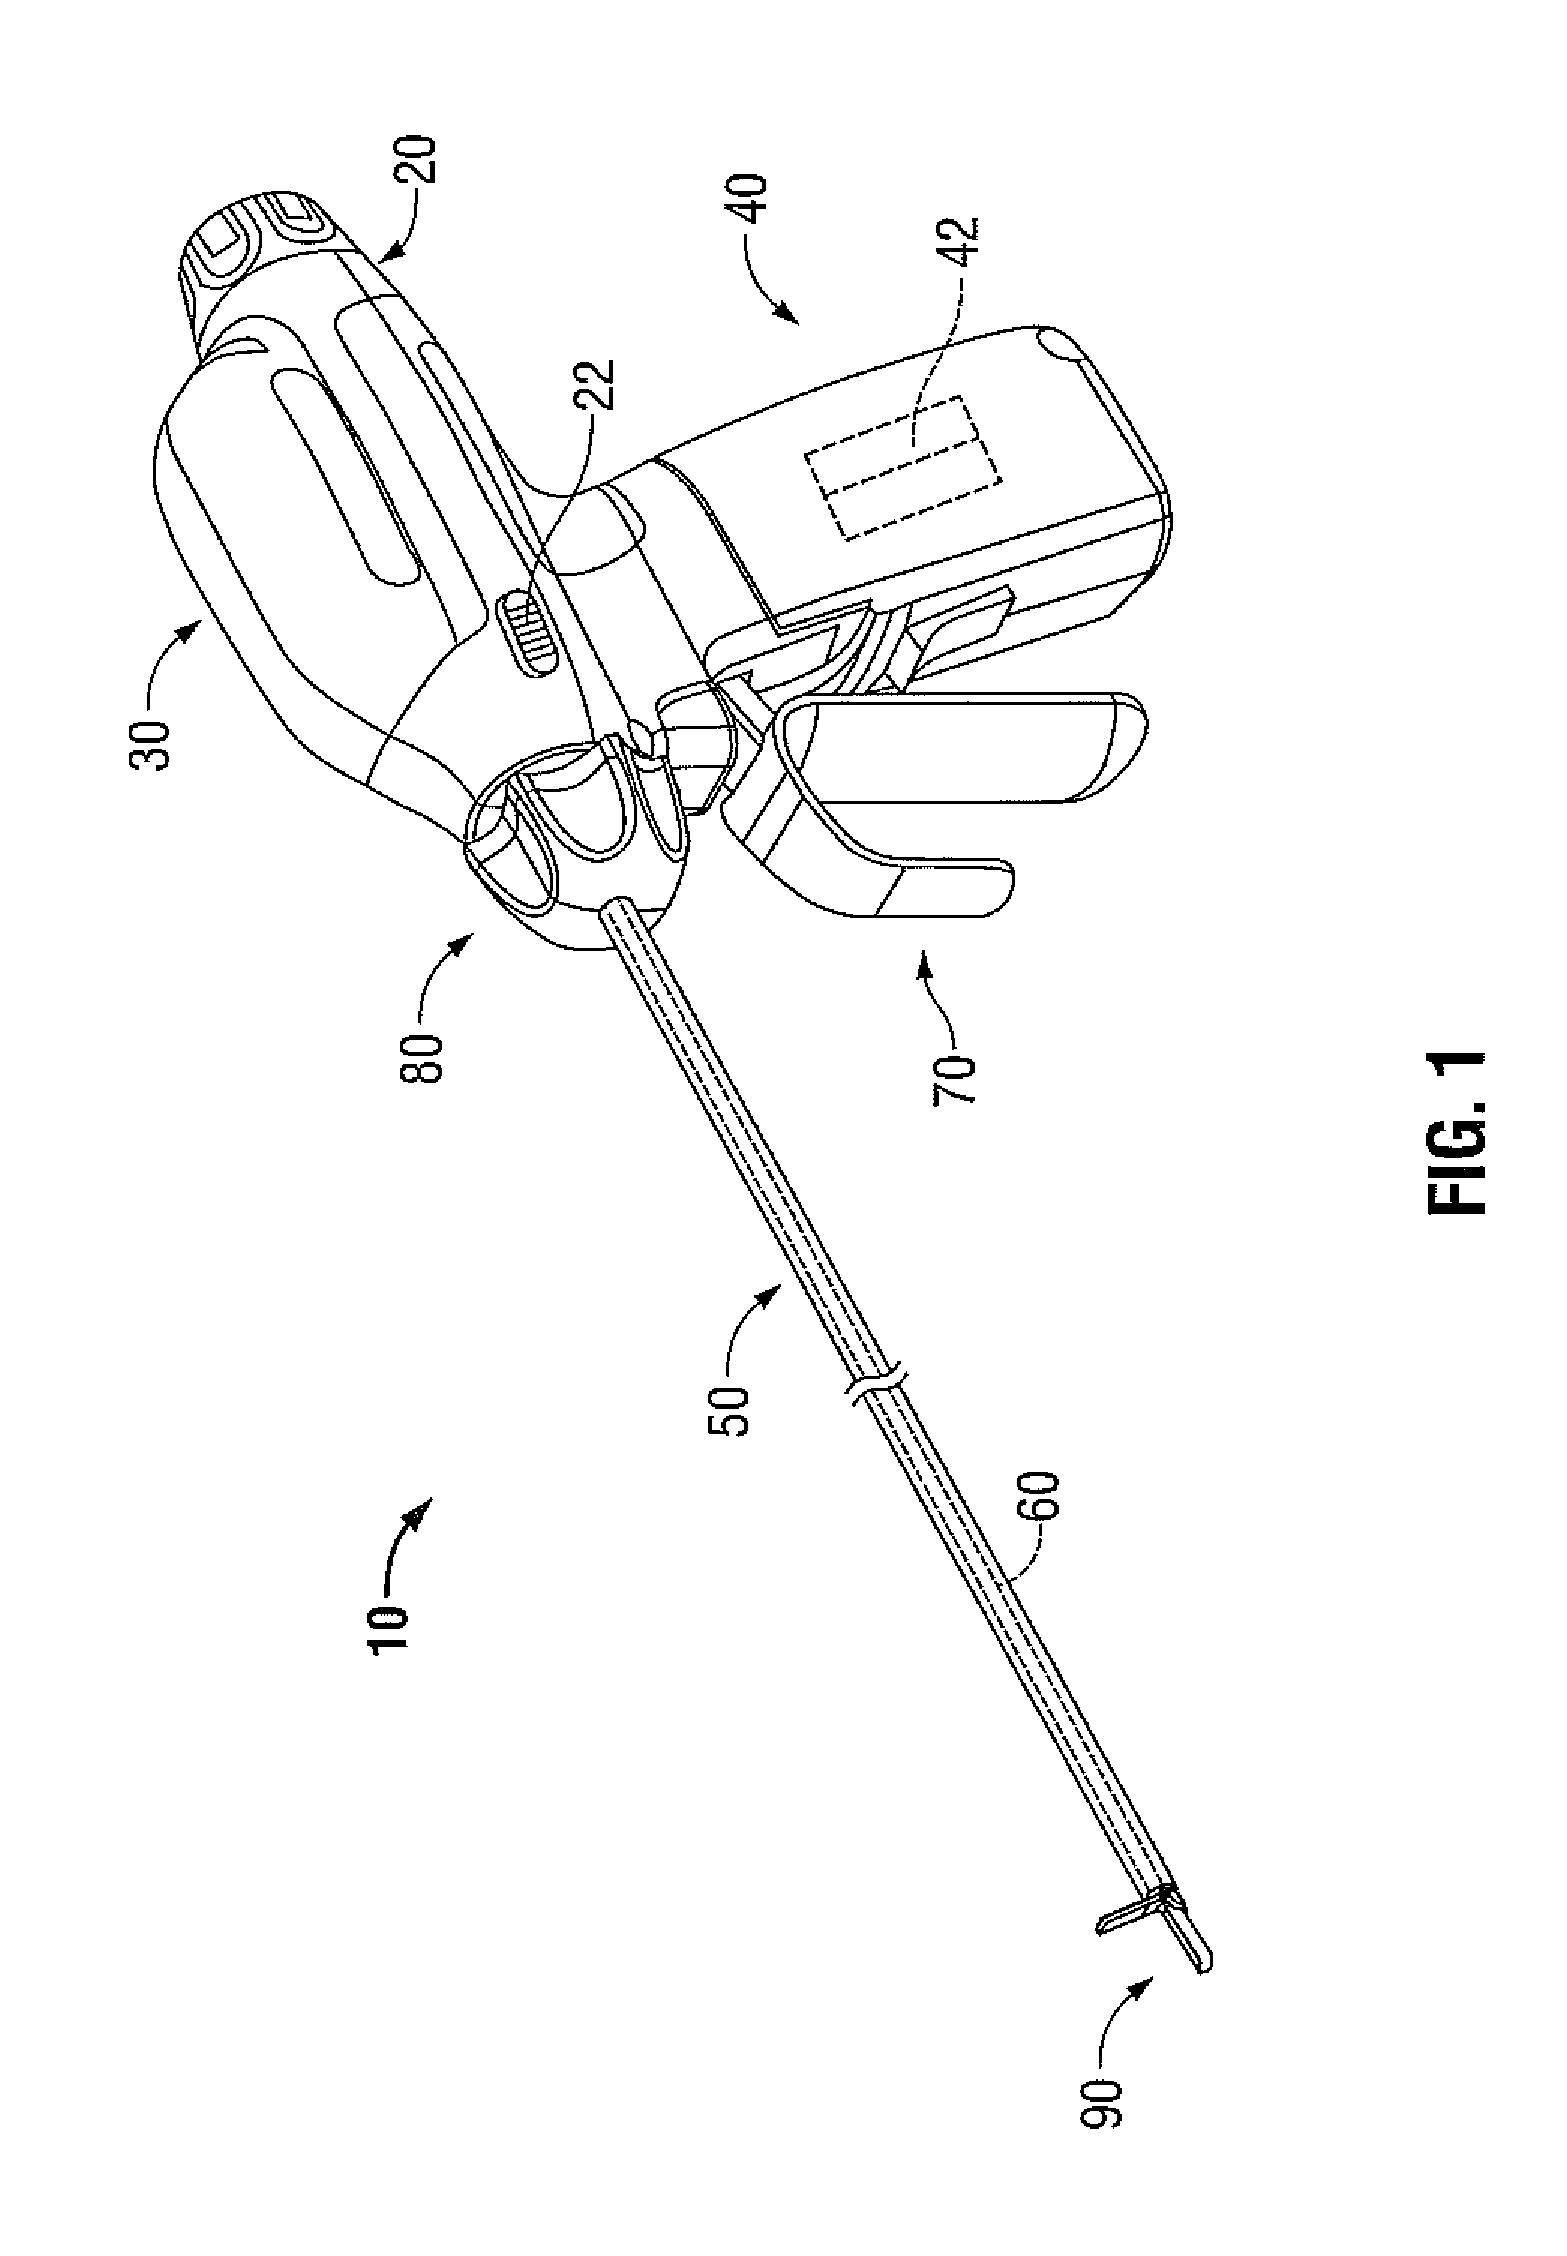 Medical ultrasound instrument with articulated jaws